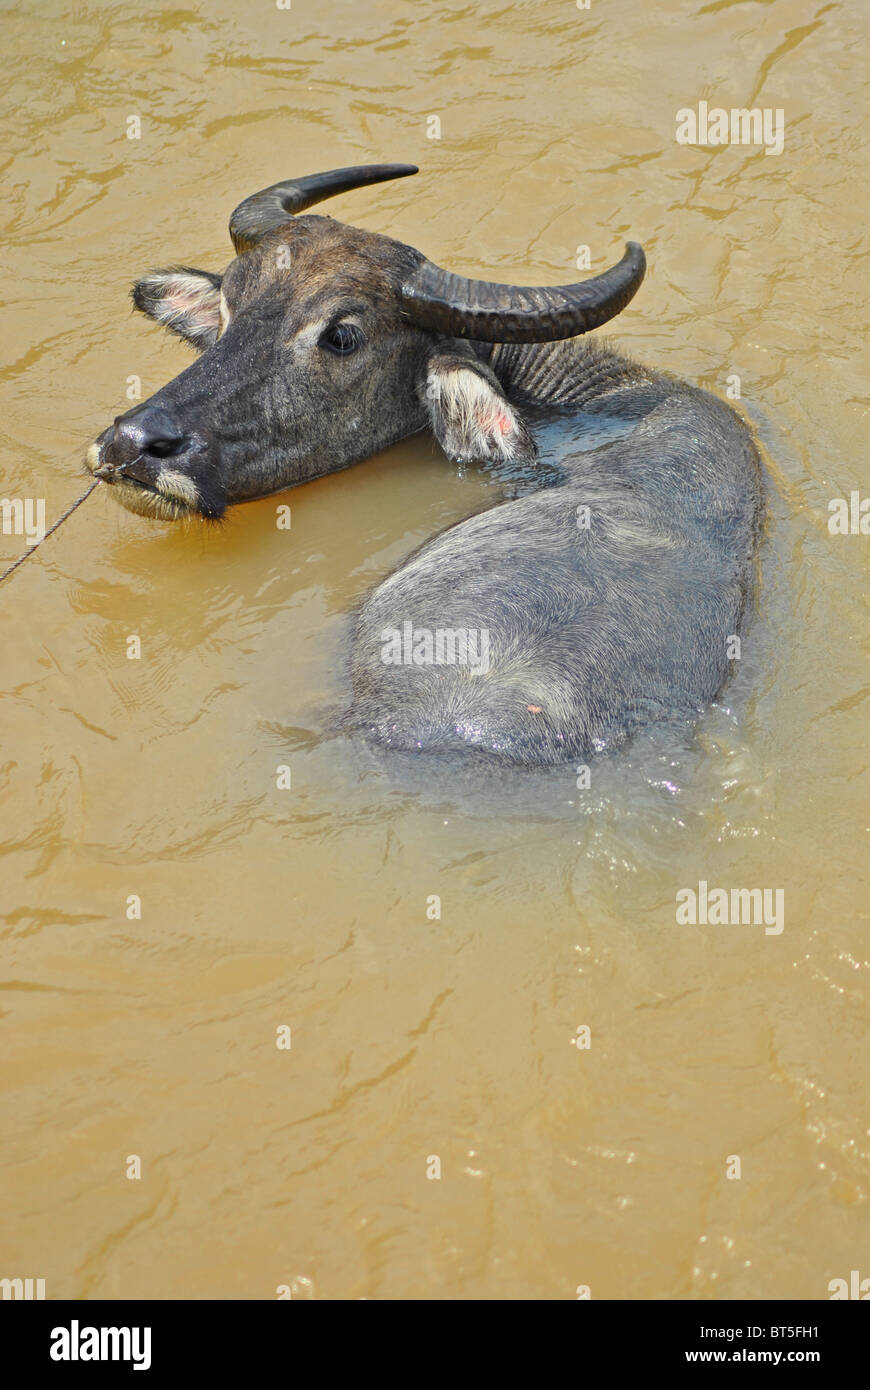 Buffalo Bathing In River Resolution Stock Photography and Images - Alamy